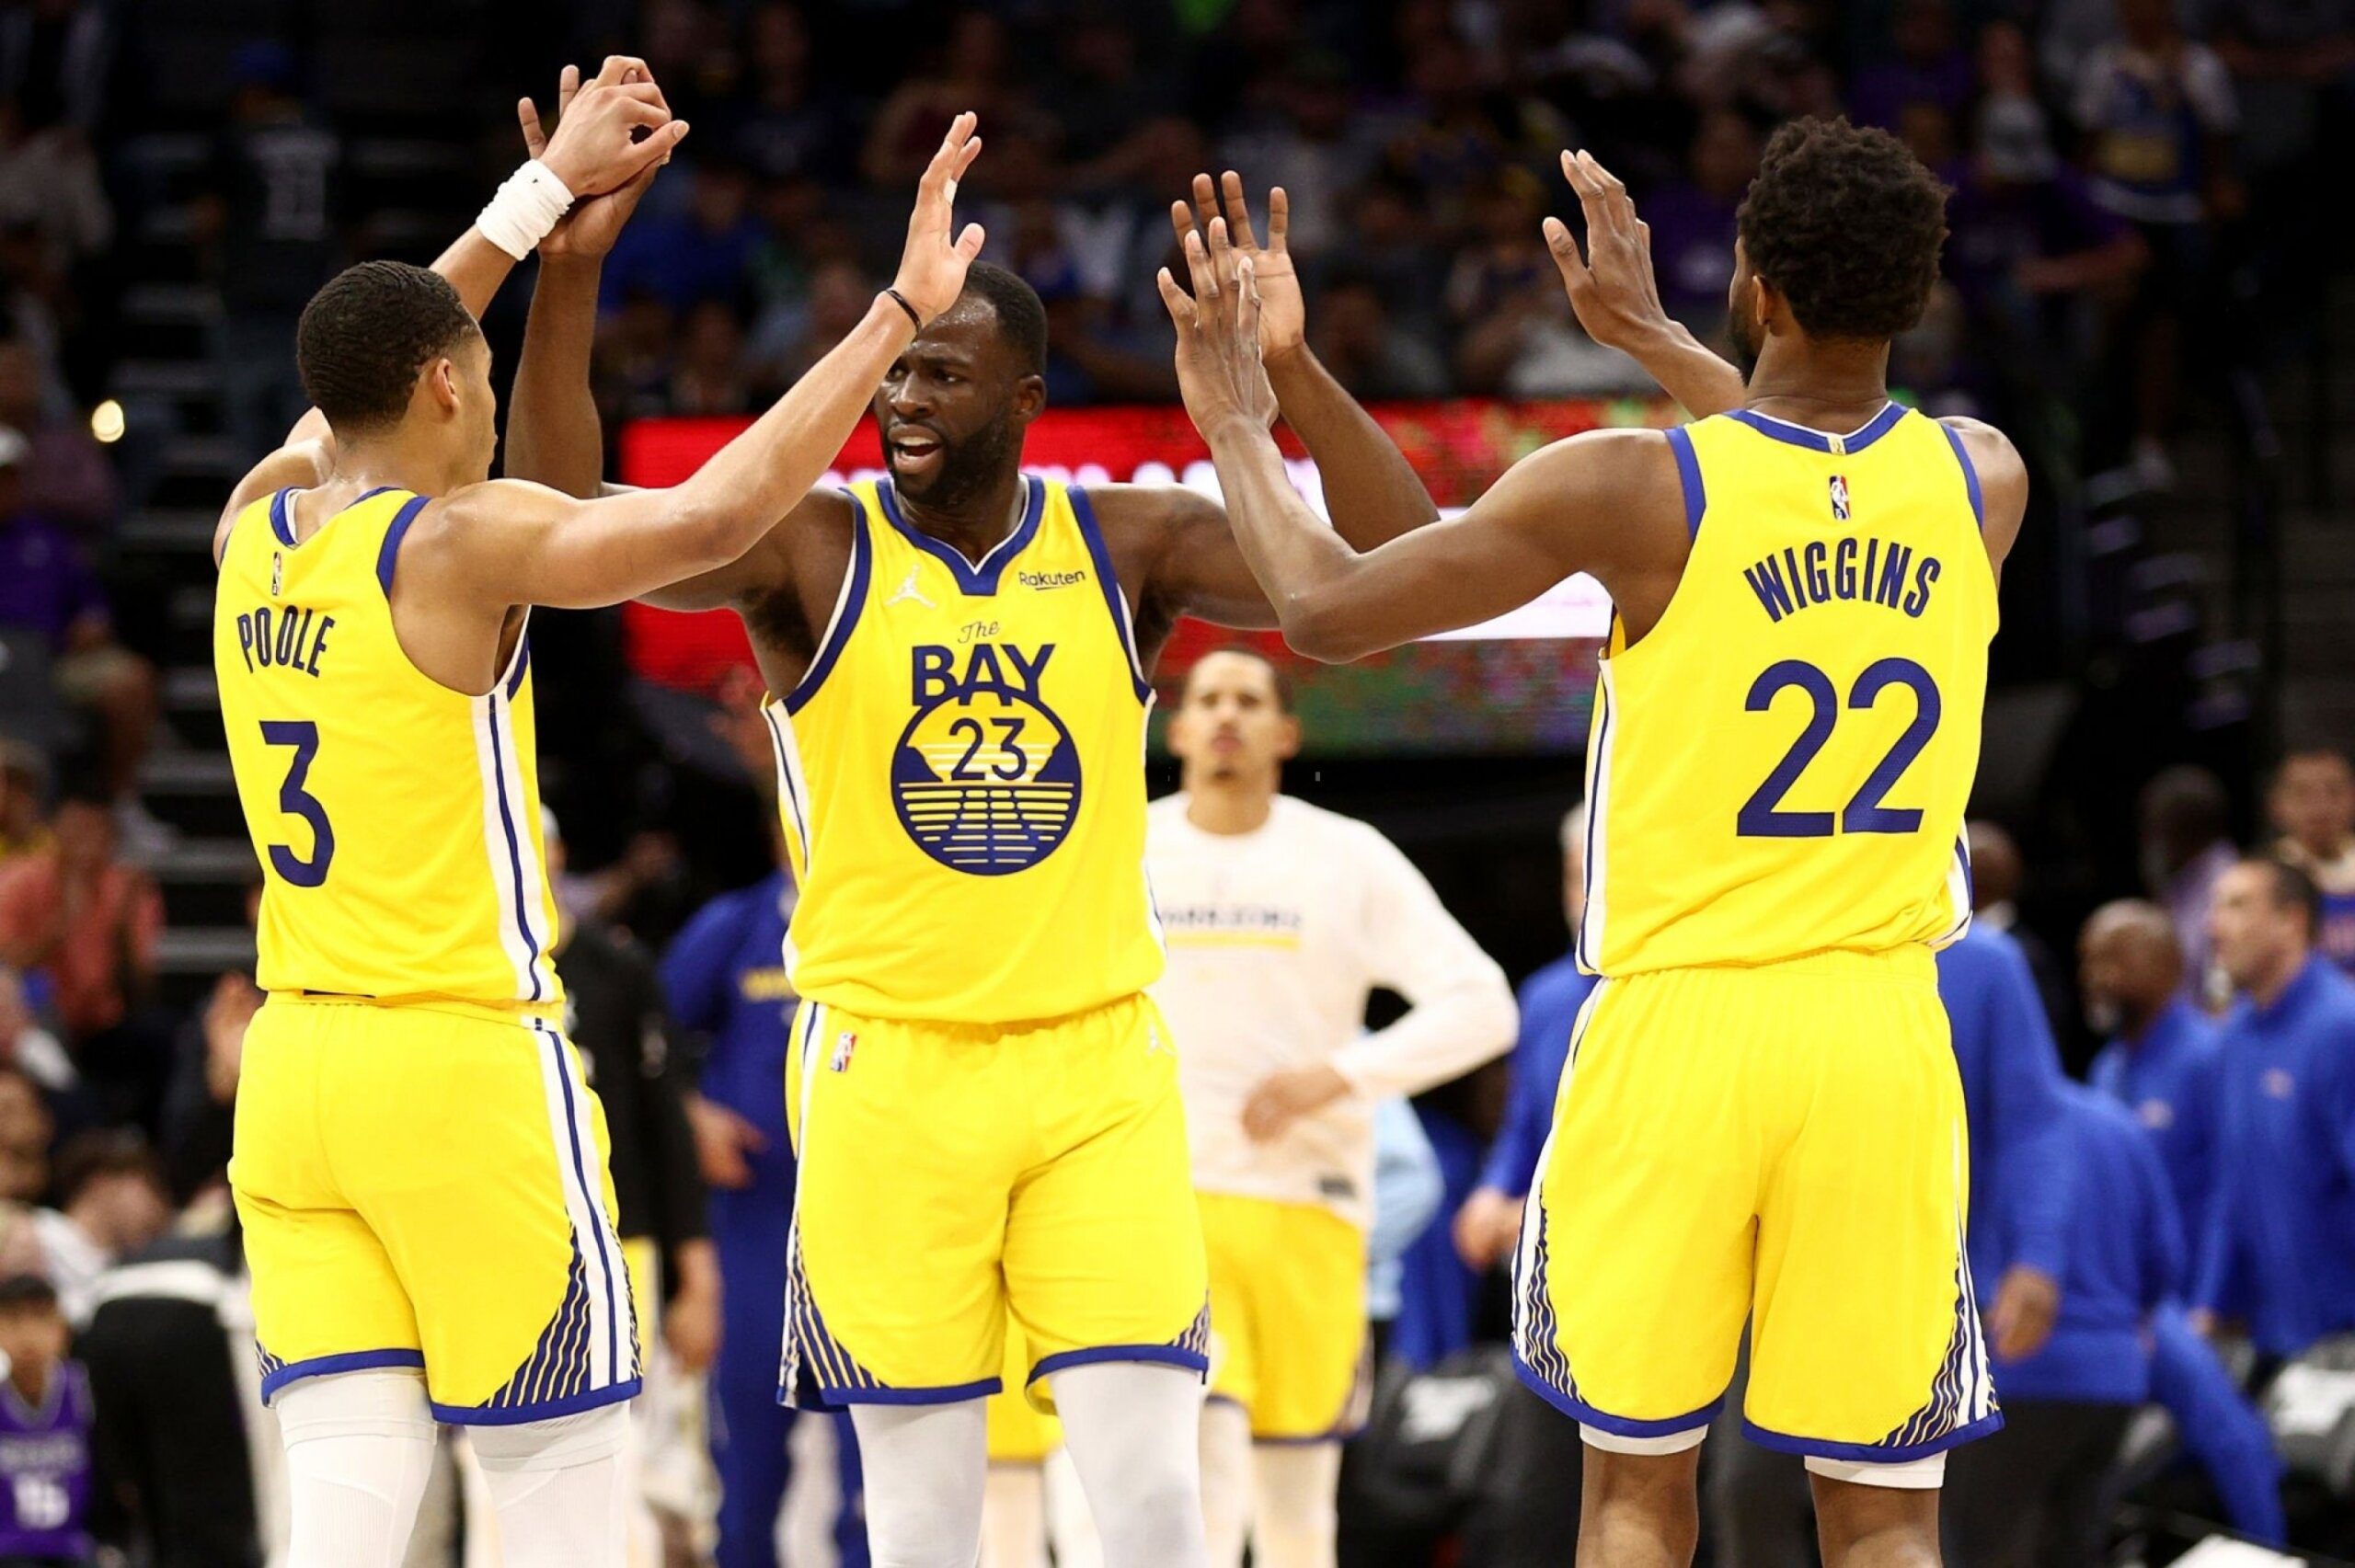 SACRAMENTO, CALIFORNIA - APRIL 03: Jordan Poole #3, Draymond Green #23 and Andrew Wiggins #22 of the Golden State Warriors high five after the Warriors scored a basket against the Sacramento Kings in the second half at Golden 1 Center on April 03, 2022 in Sacramento, California. Photo by Ezra Shaw/Getty Images